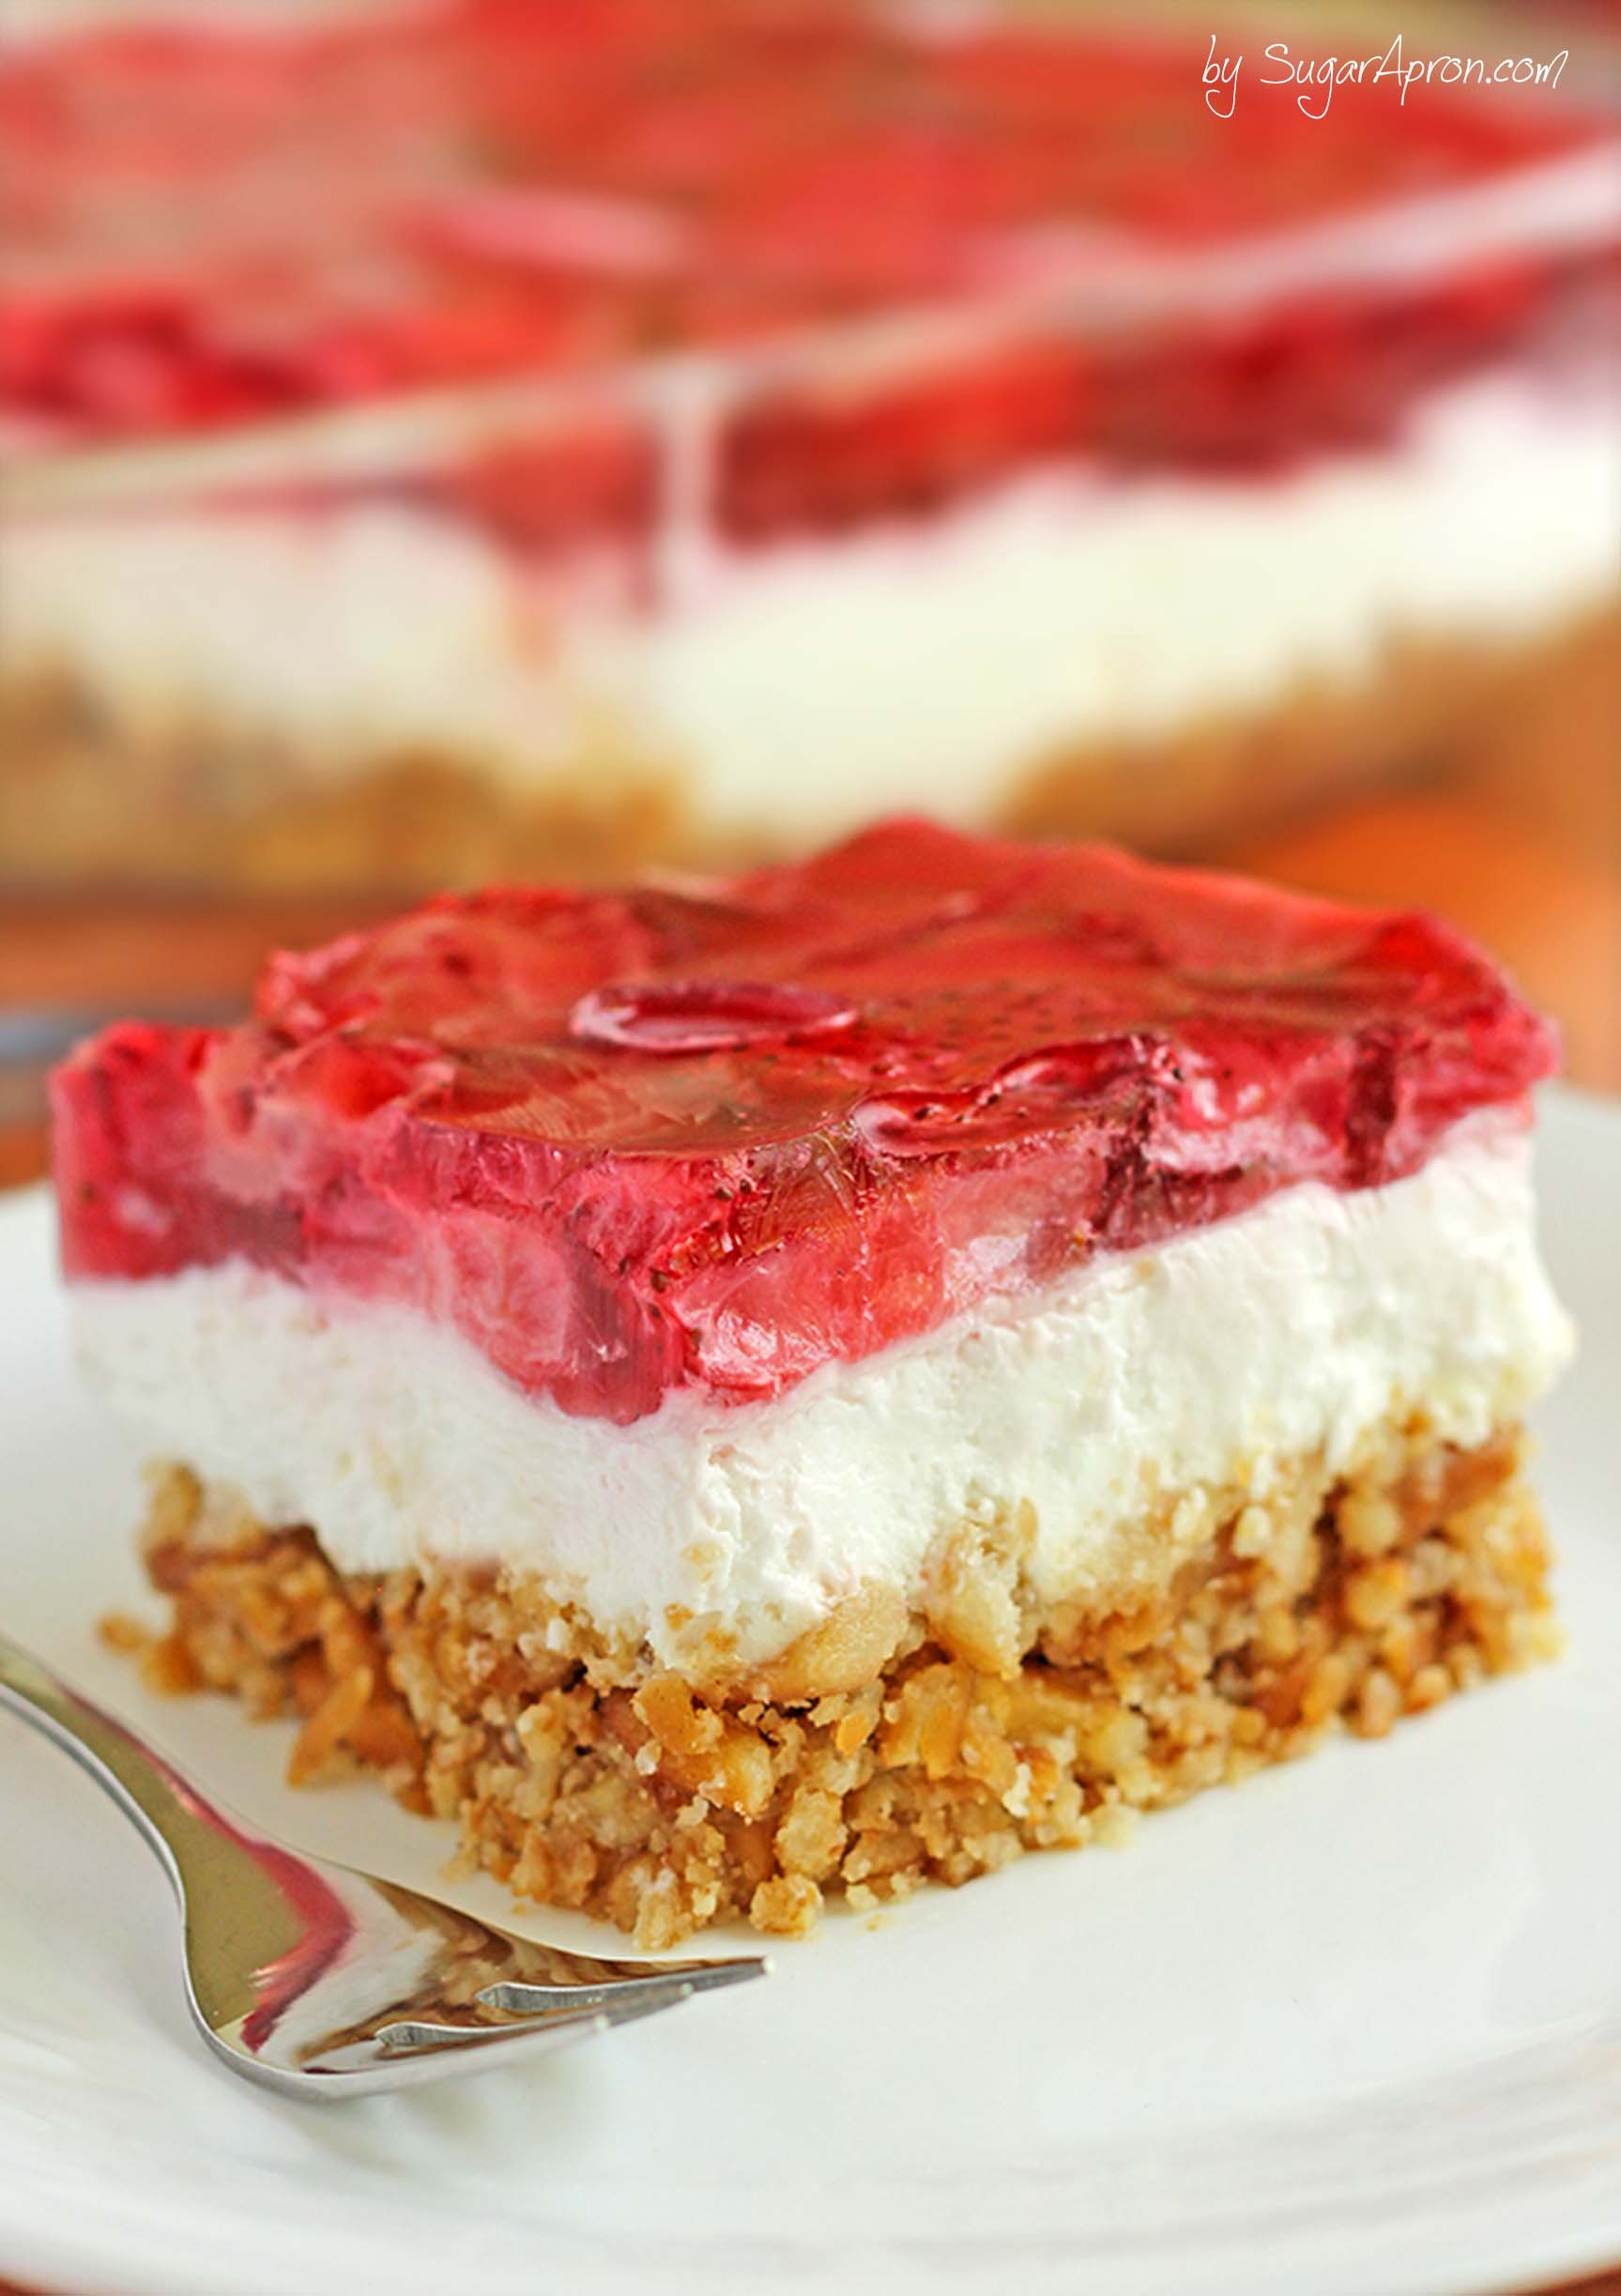 This Strawberry Pretzel Dessert just begging you to make it for your next summer picnic or bbq to serve.